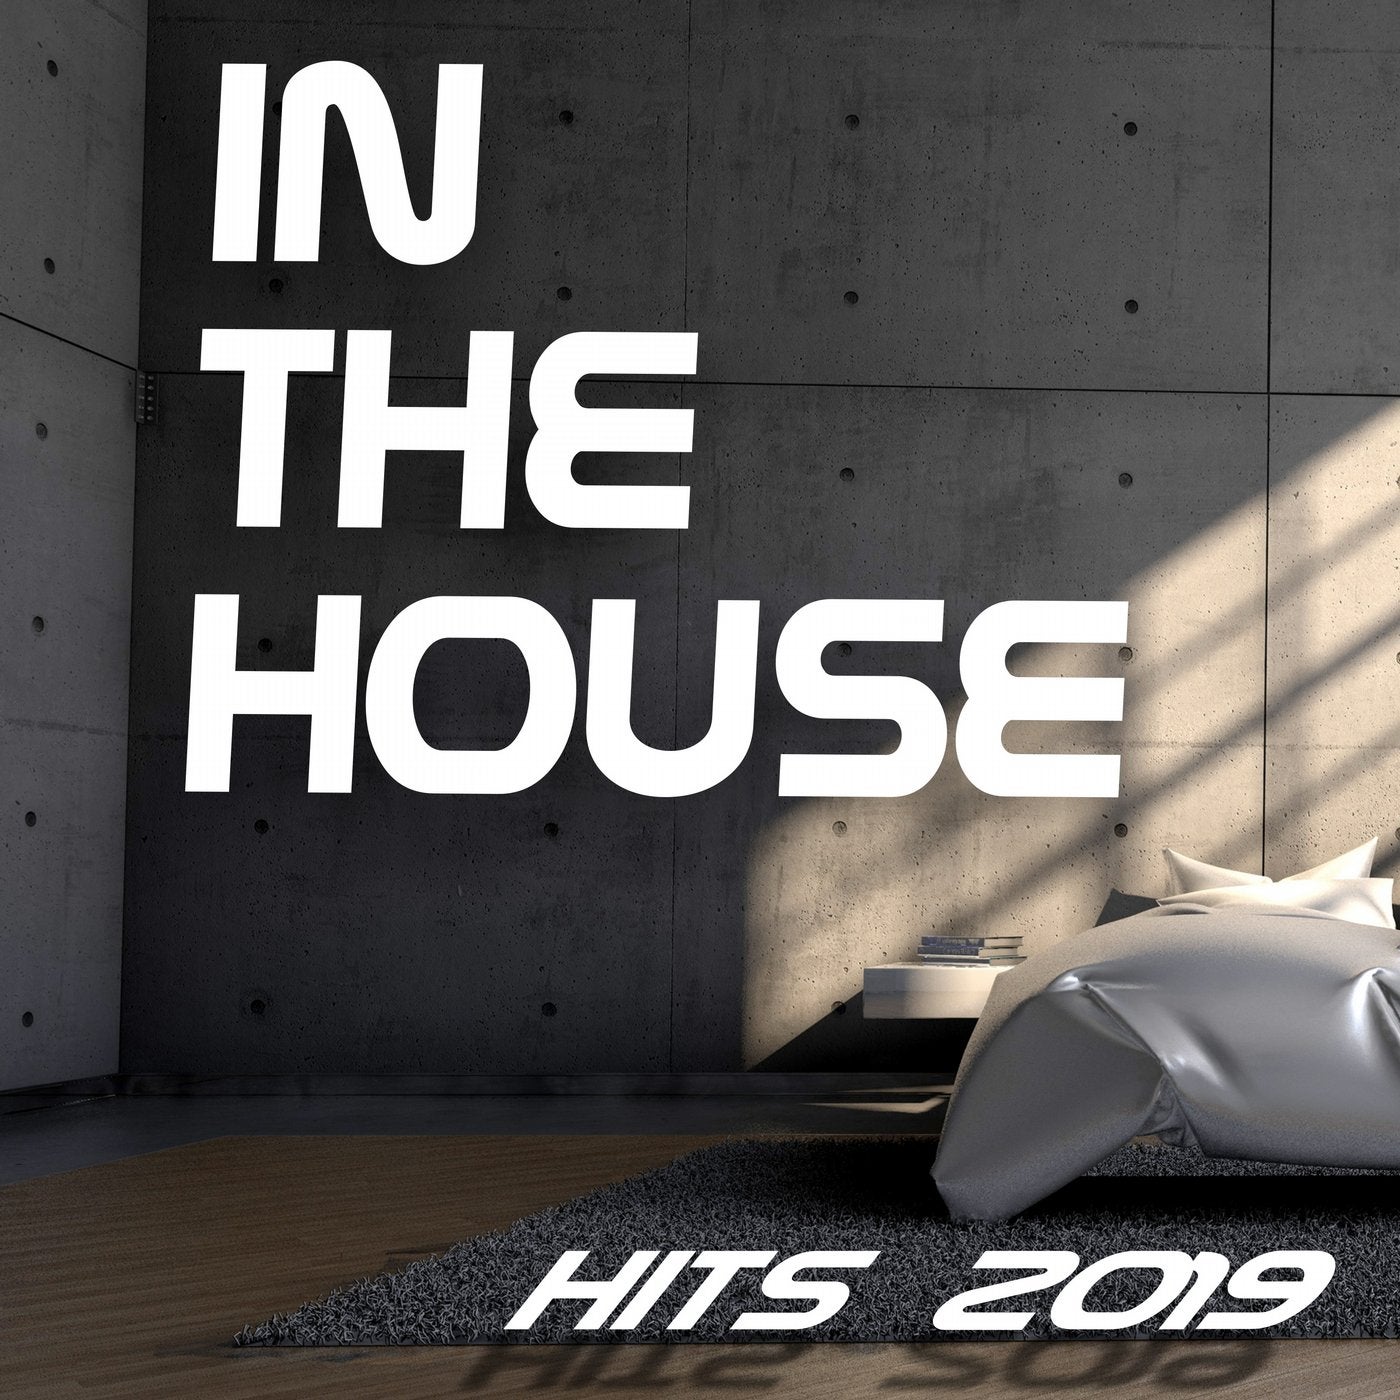 In the House Hits 2019